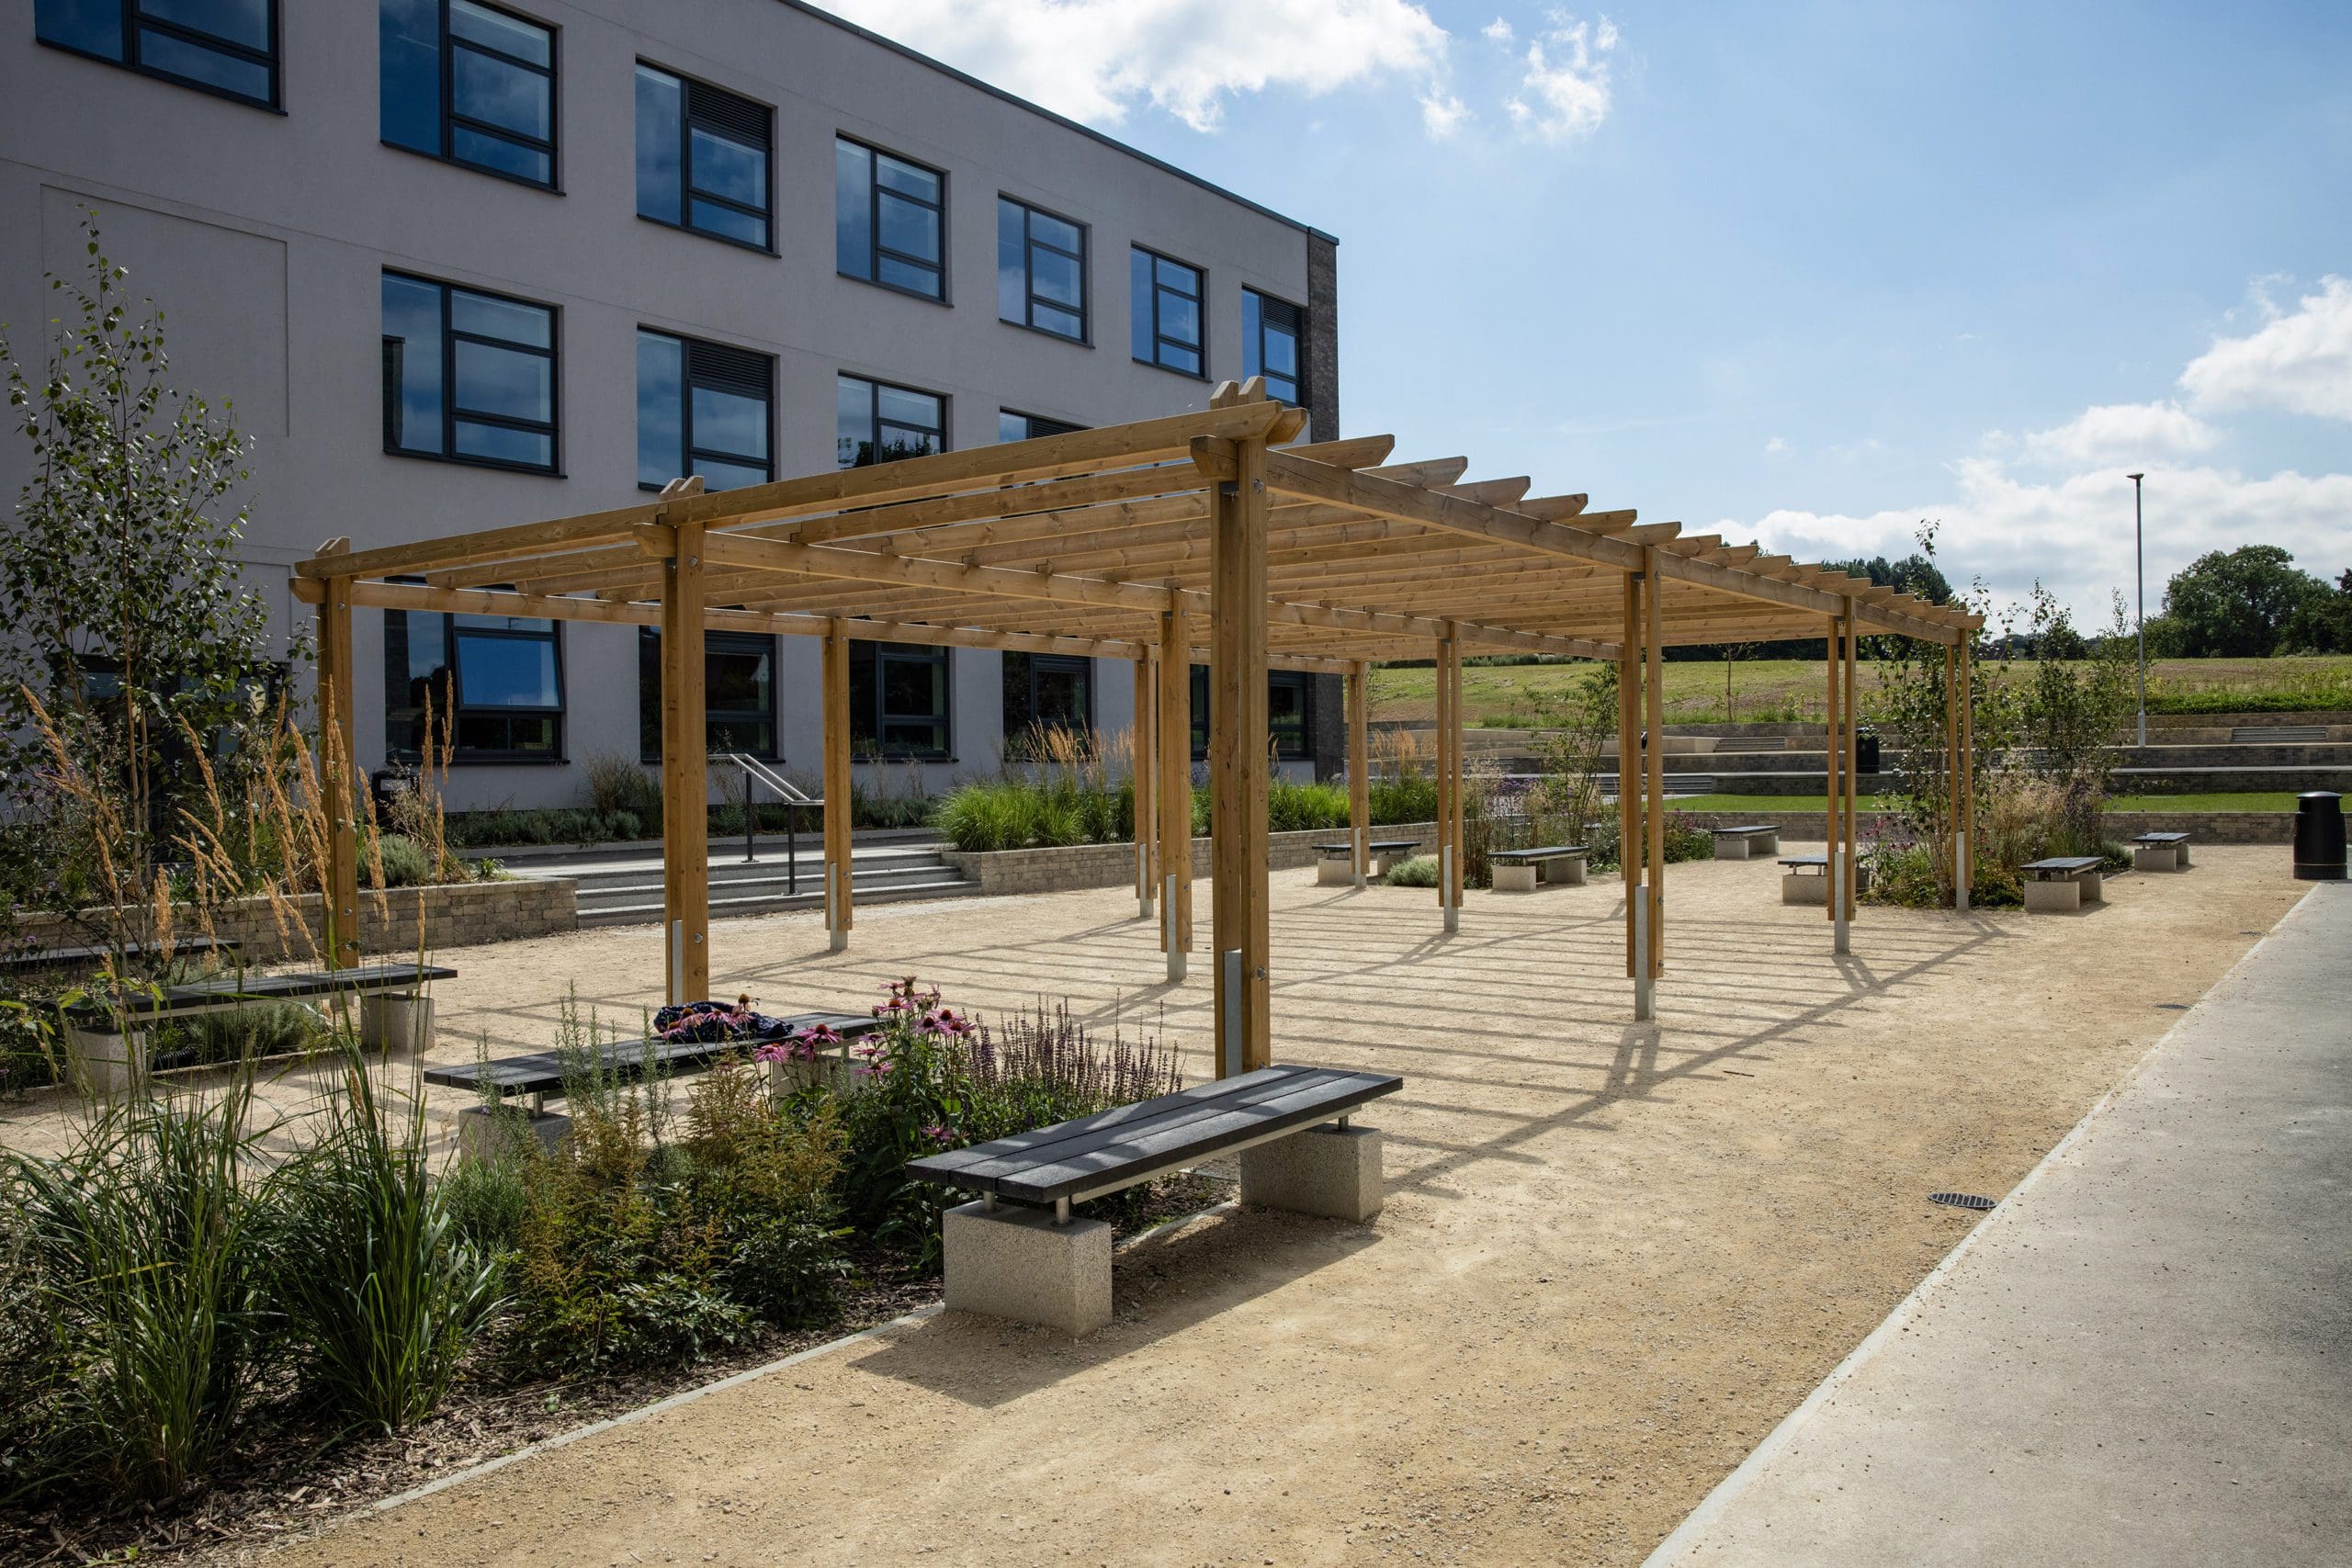 wooden pergola in the middle of the school courtyard